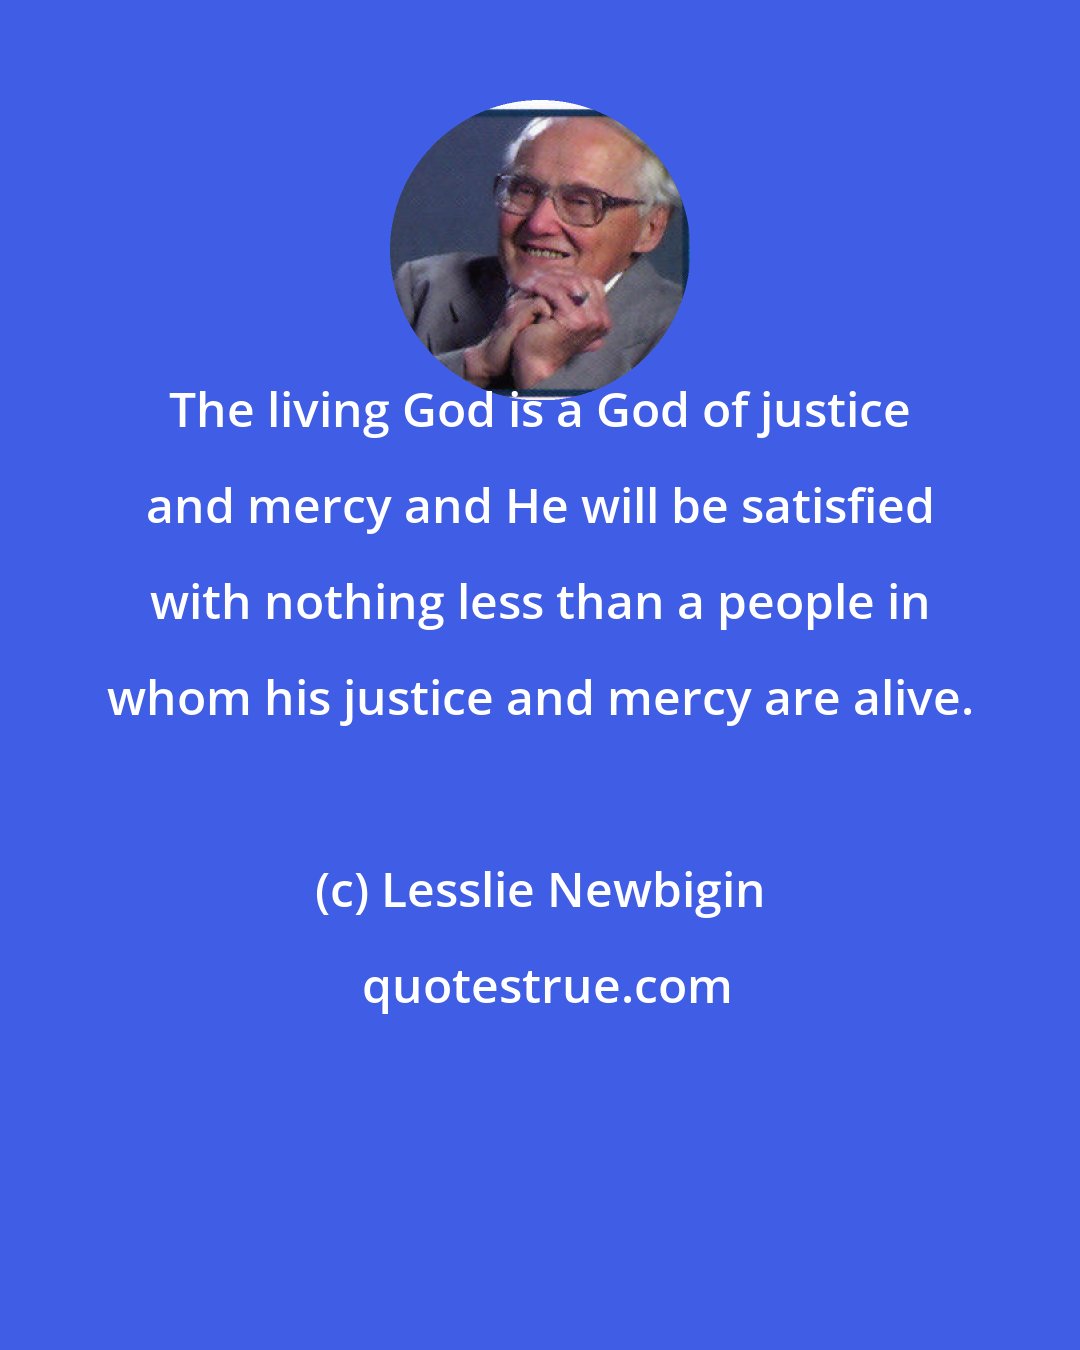 Lesslie Newbigin: The living God is a God of justice and mercy and He will be satisfied with nothing less than a people in whom his justice and mercy are alive.